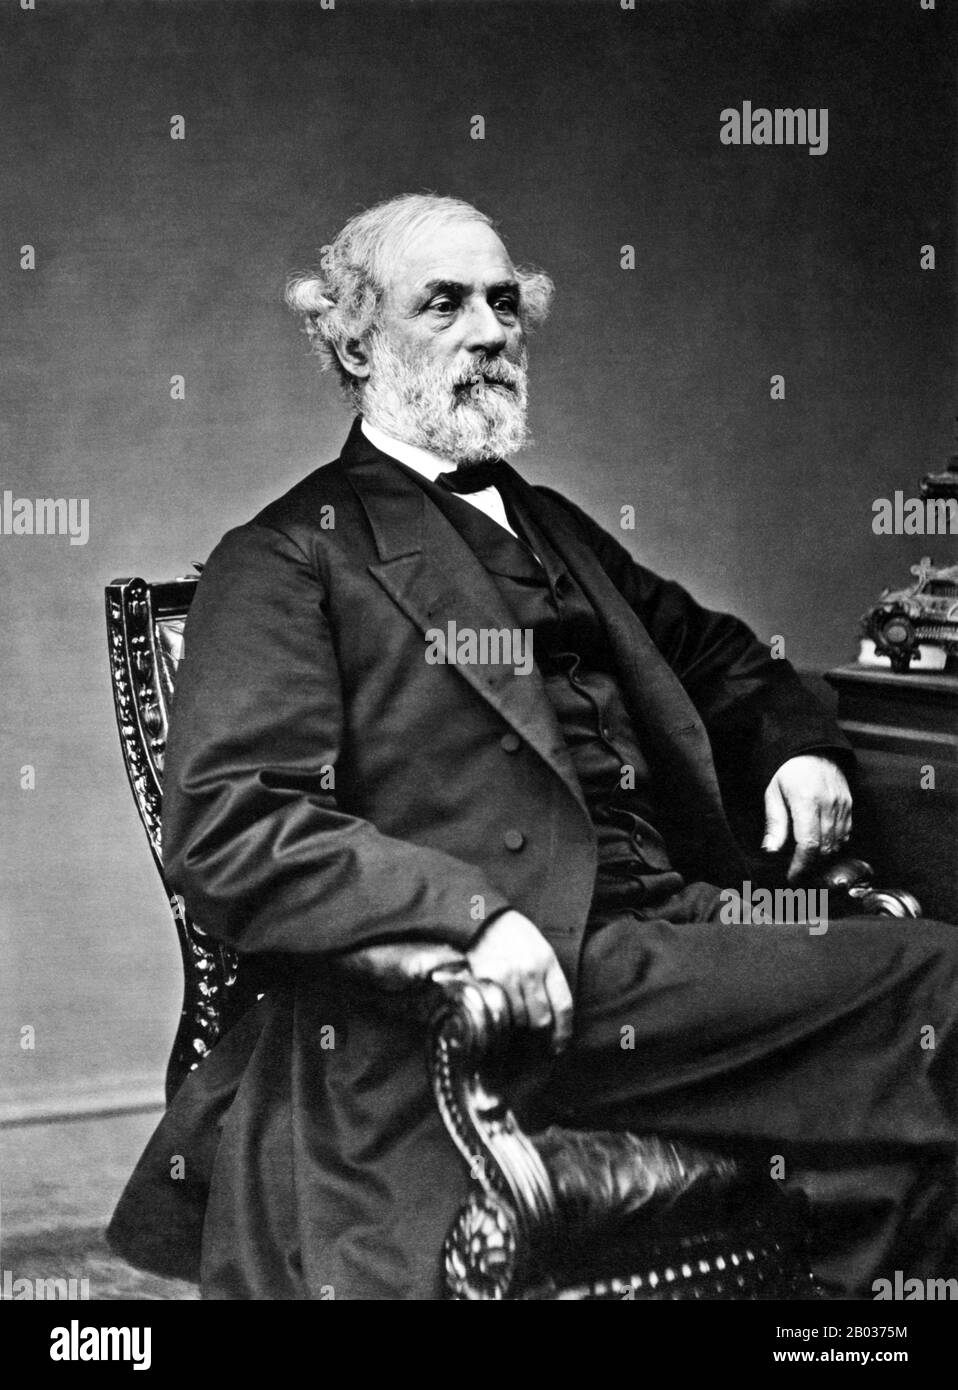 Robert E. Lee (1807–1870) was an American general known for commanding the Confederate Army of Northern Virginia in the American Civil War from 1862 until his surrender in 1865. Lee was a top graduate of the United States Military Academy and an exceptional officer and military engineer in the United States Army for 32 years.  When Virginia seceded from the Union in April 1861, Lee followed his home state. After a year as senior military adviser to President Jefferson Davis, Lee took command of the main field army in 1862 and soon emerged as a shrewd tactician and battlefield commander. After Stock Photo